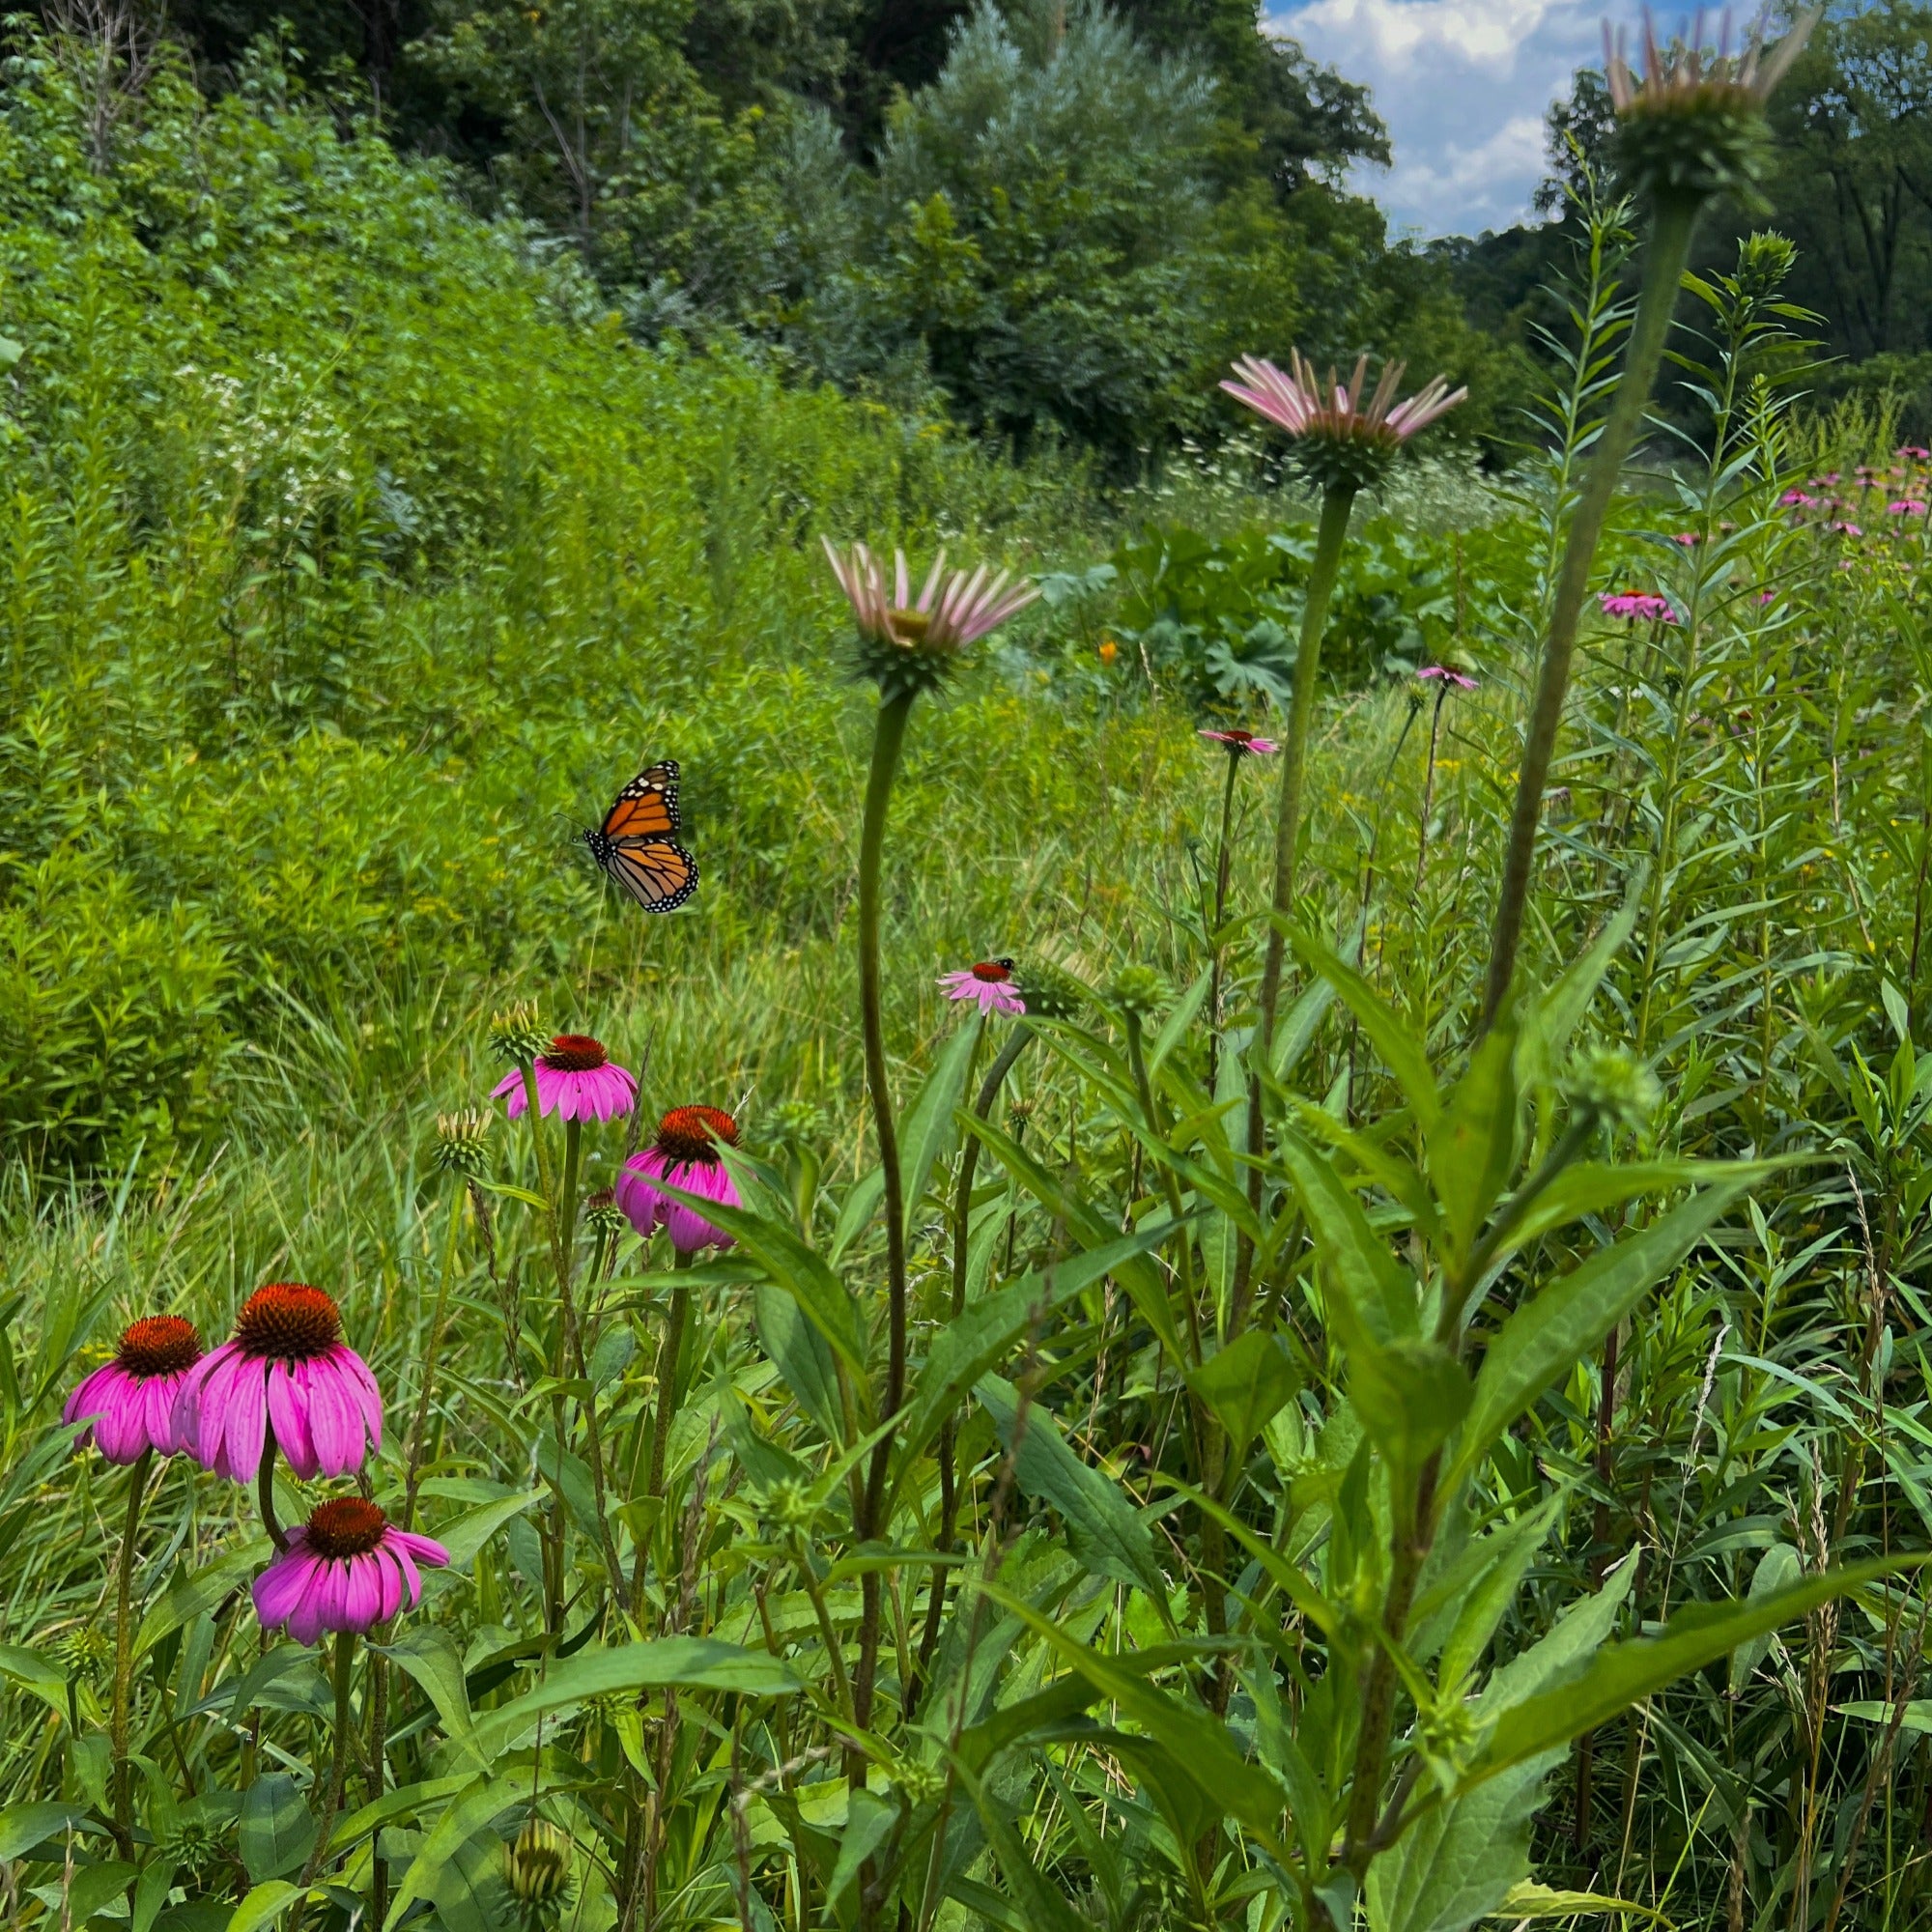 Echinacea flowers with a monarch butterfly